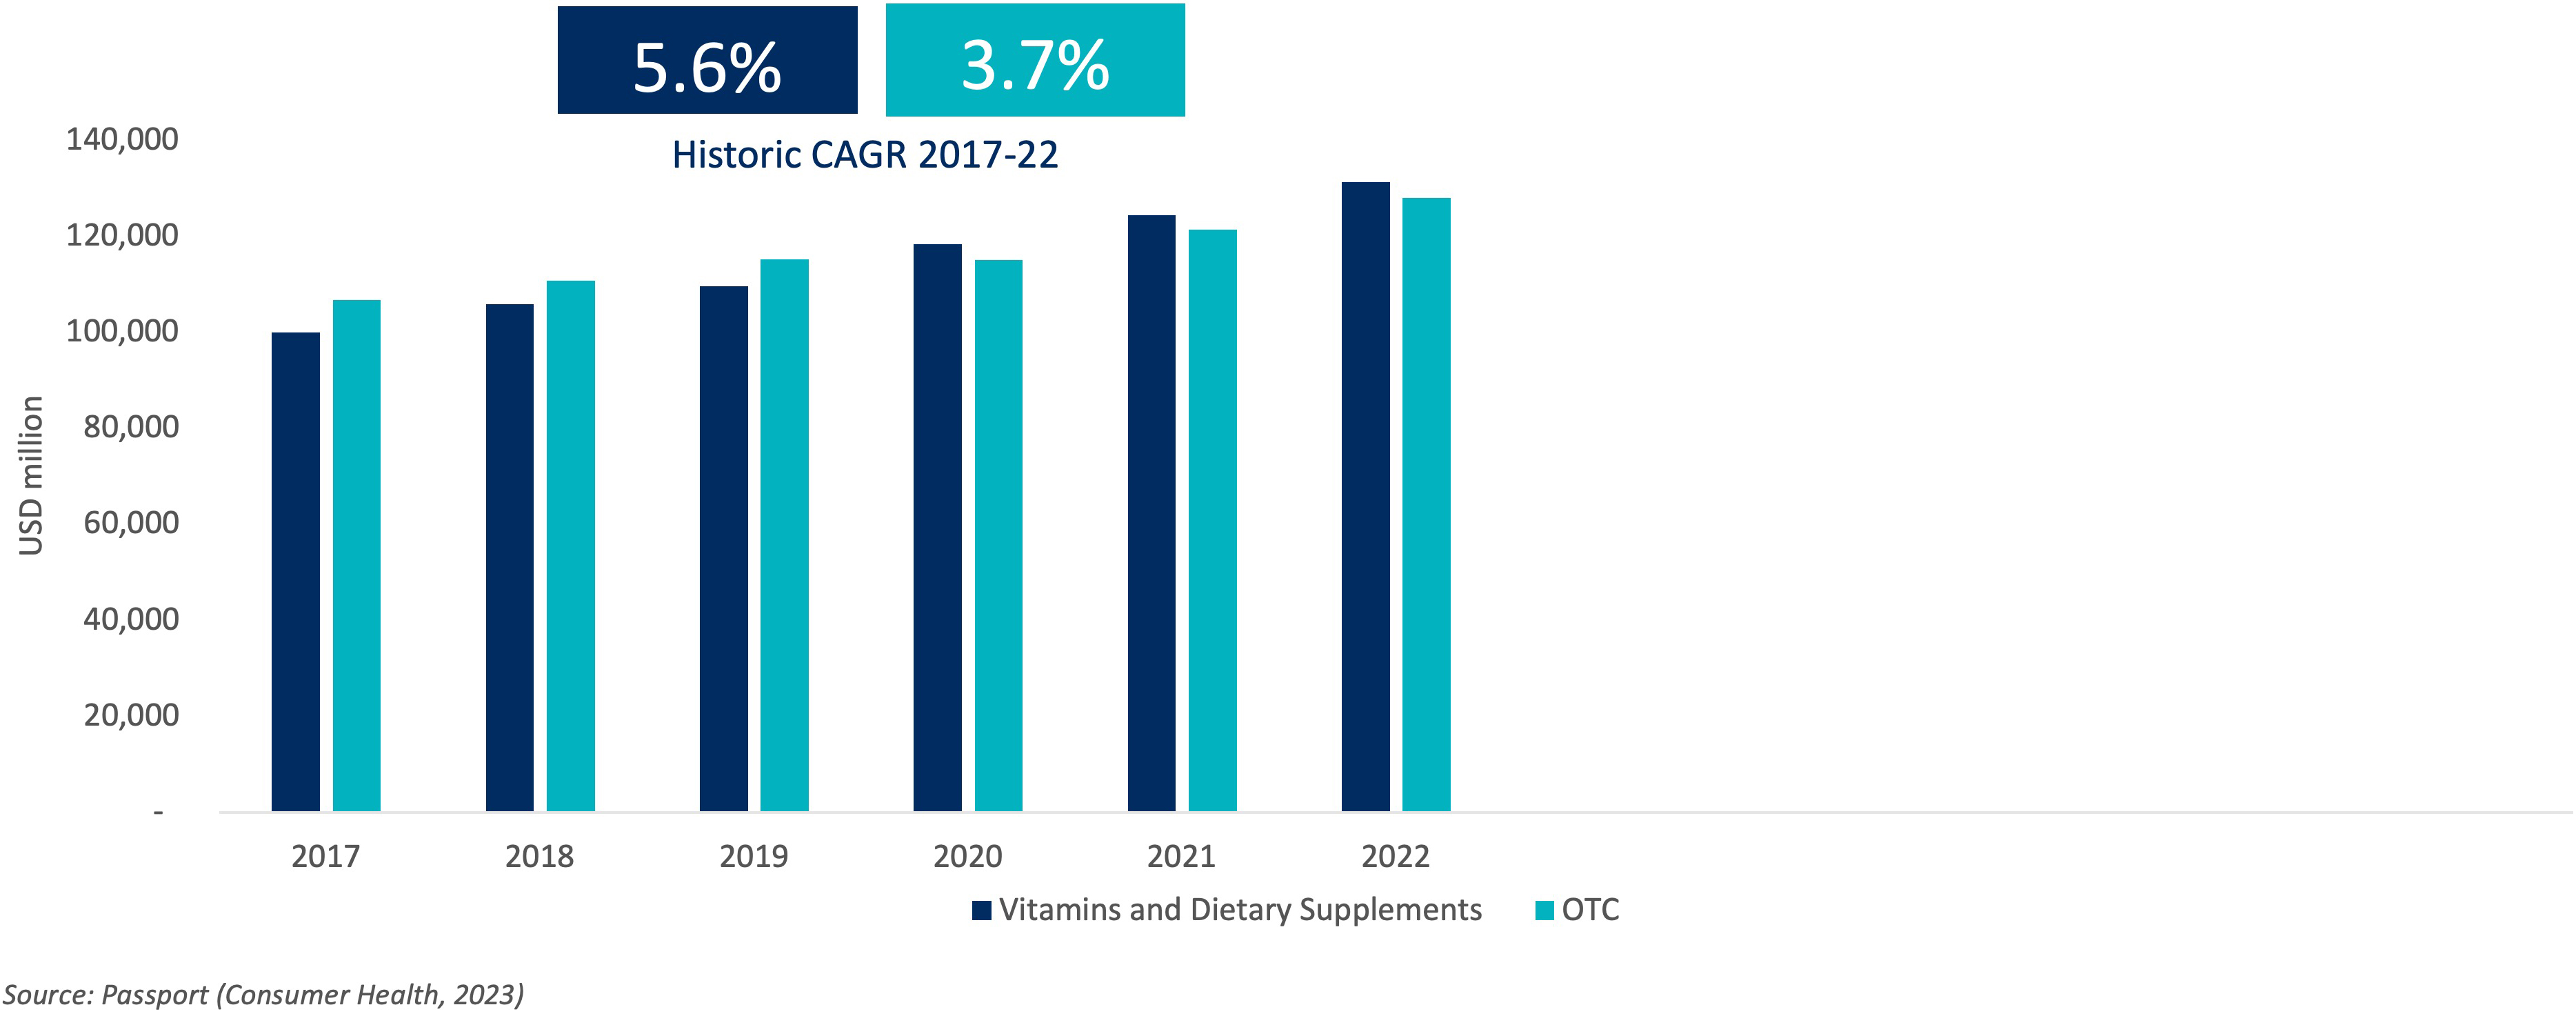 With health increasingly embedded in consumer lifestyles across the globe, VDS surpasses OTC drugs